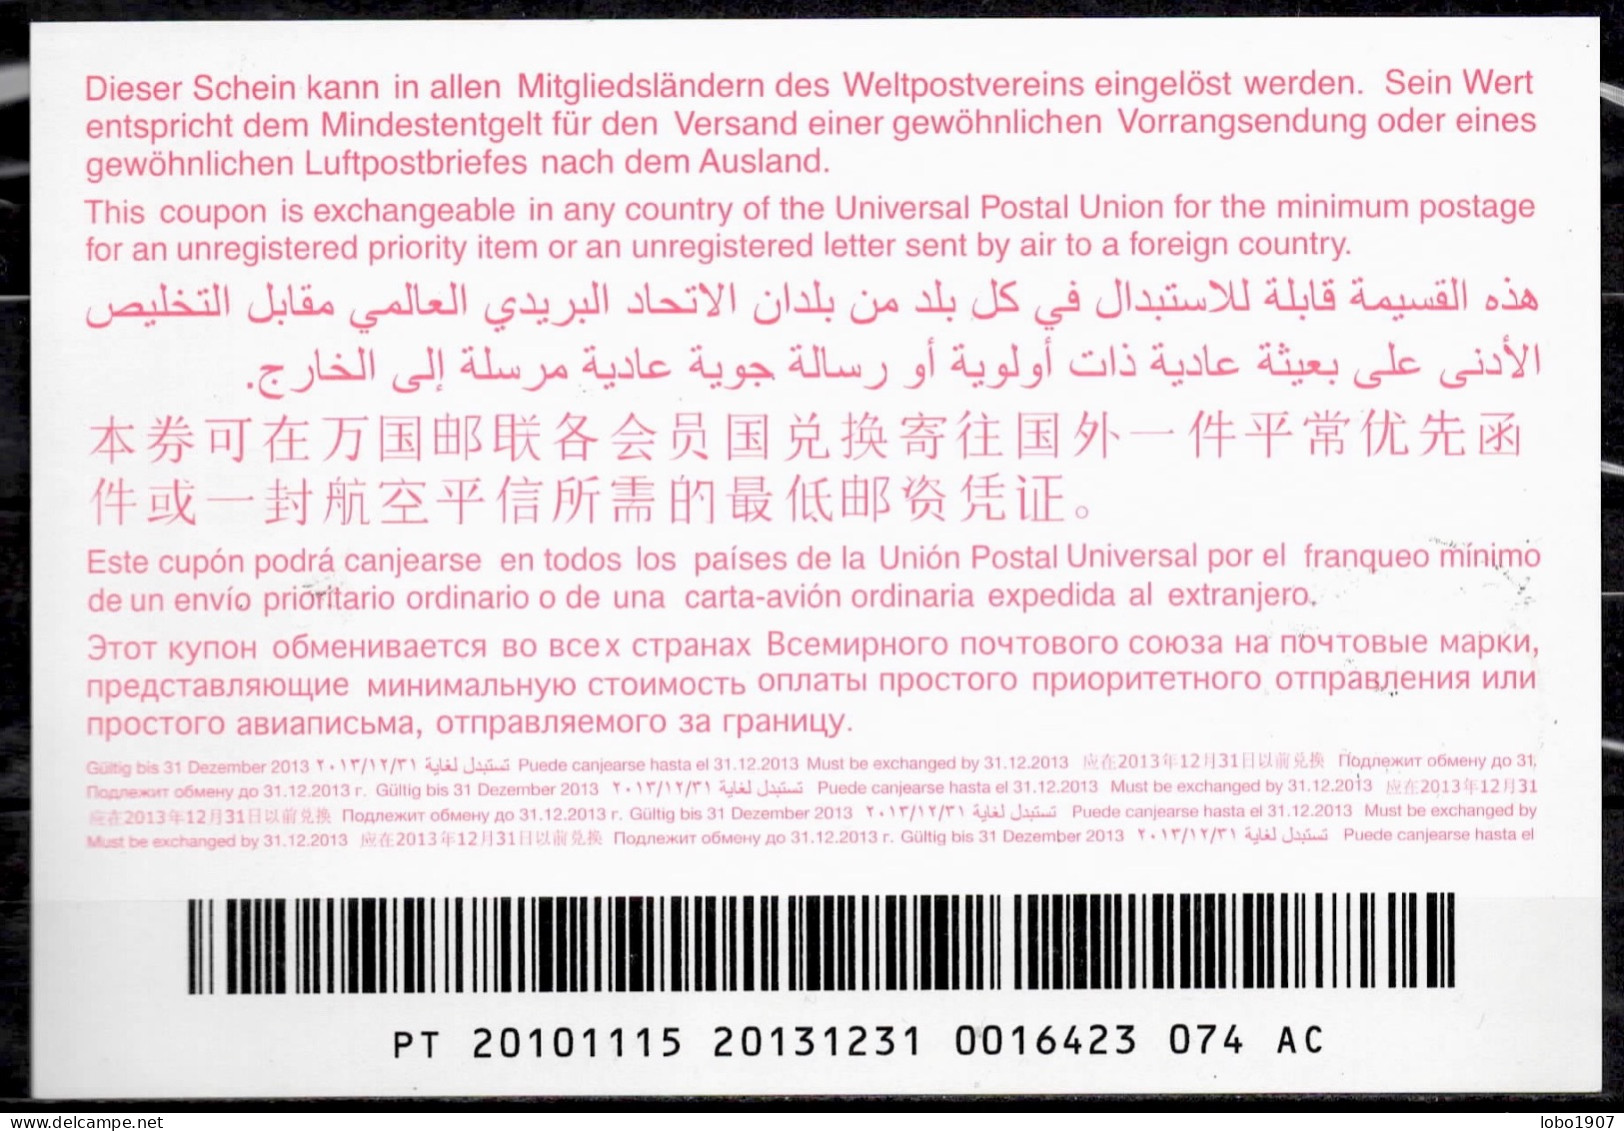 PORTUGAL  Collection of 17 International Reply Coupon Reponse Antwortschein Cupon de Respuesta Cupao Resposta  IRC IAS